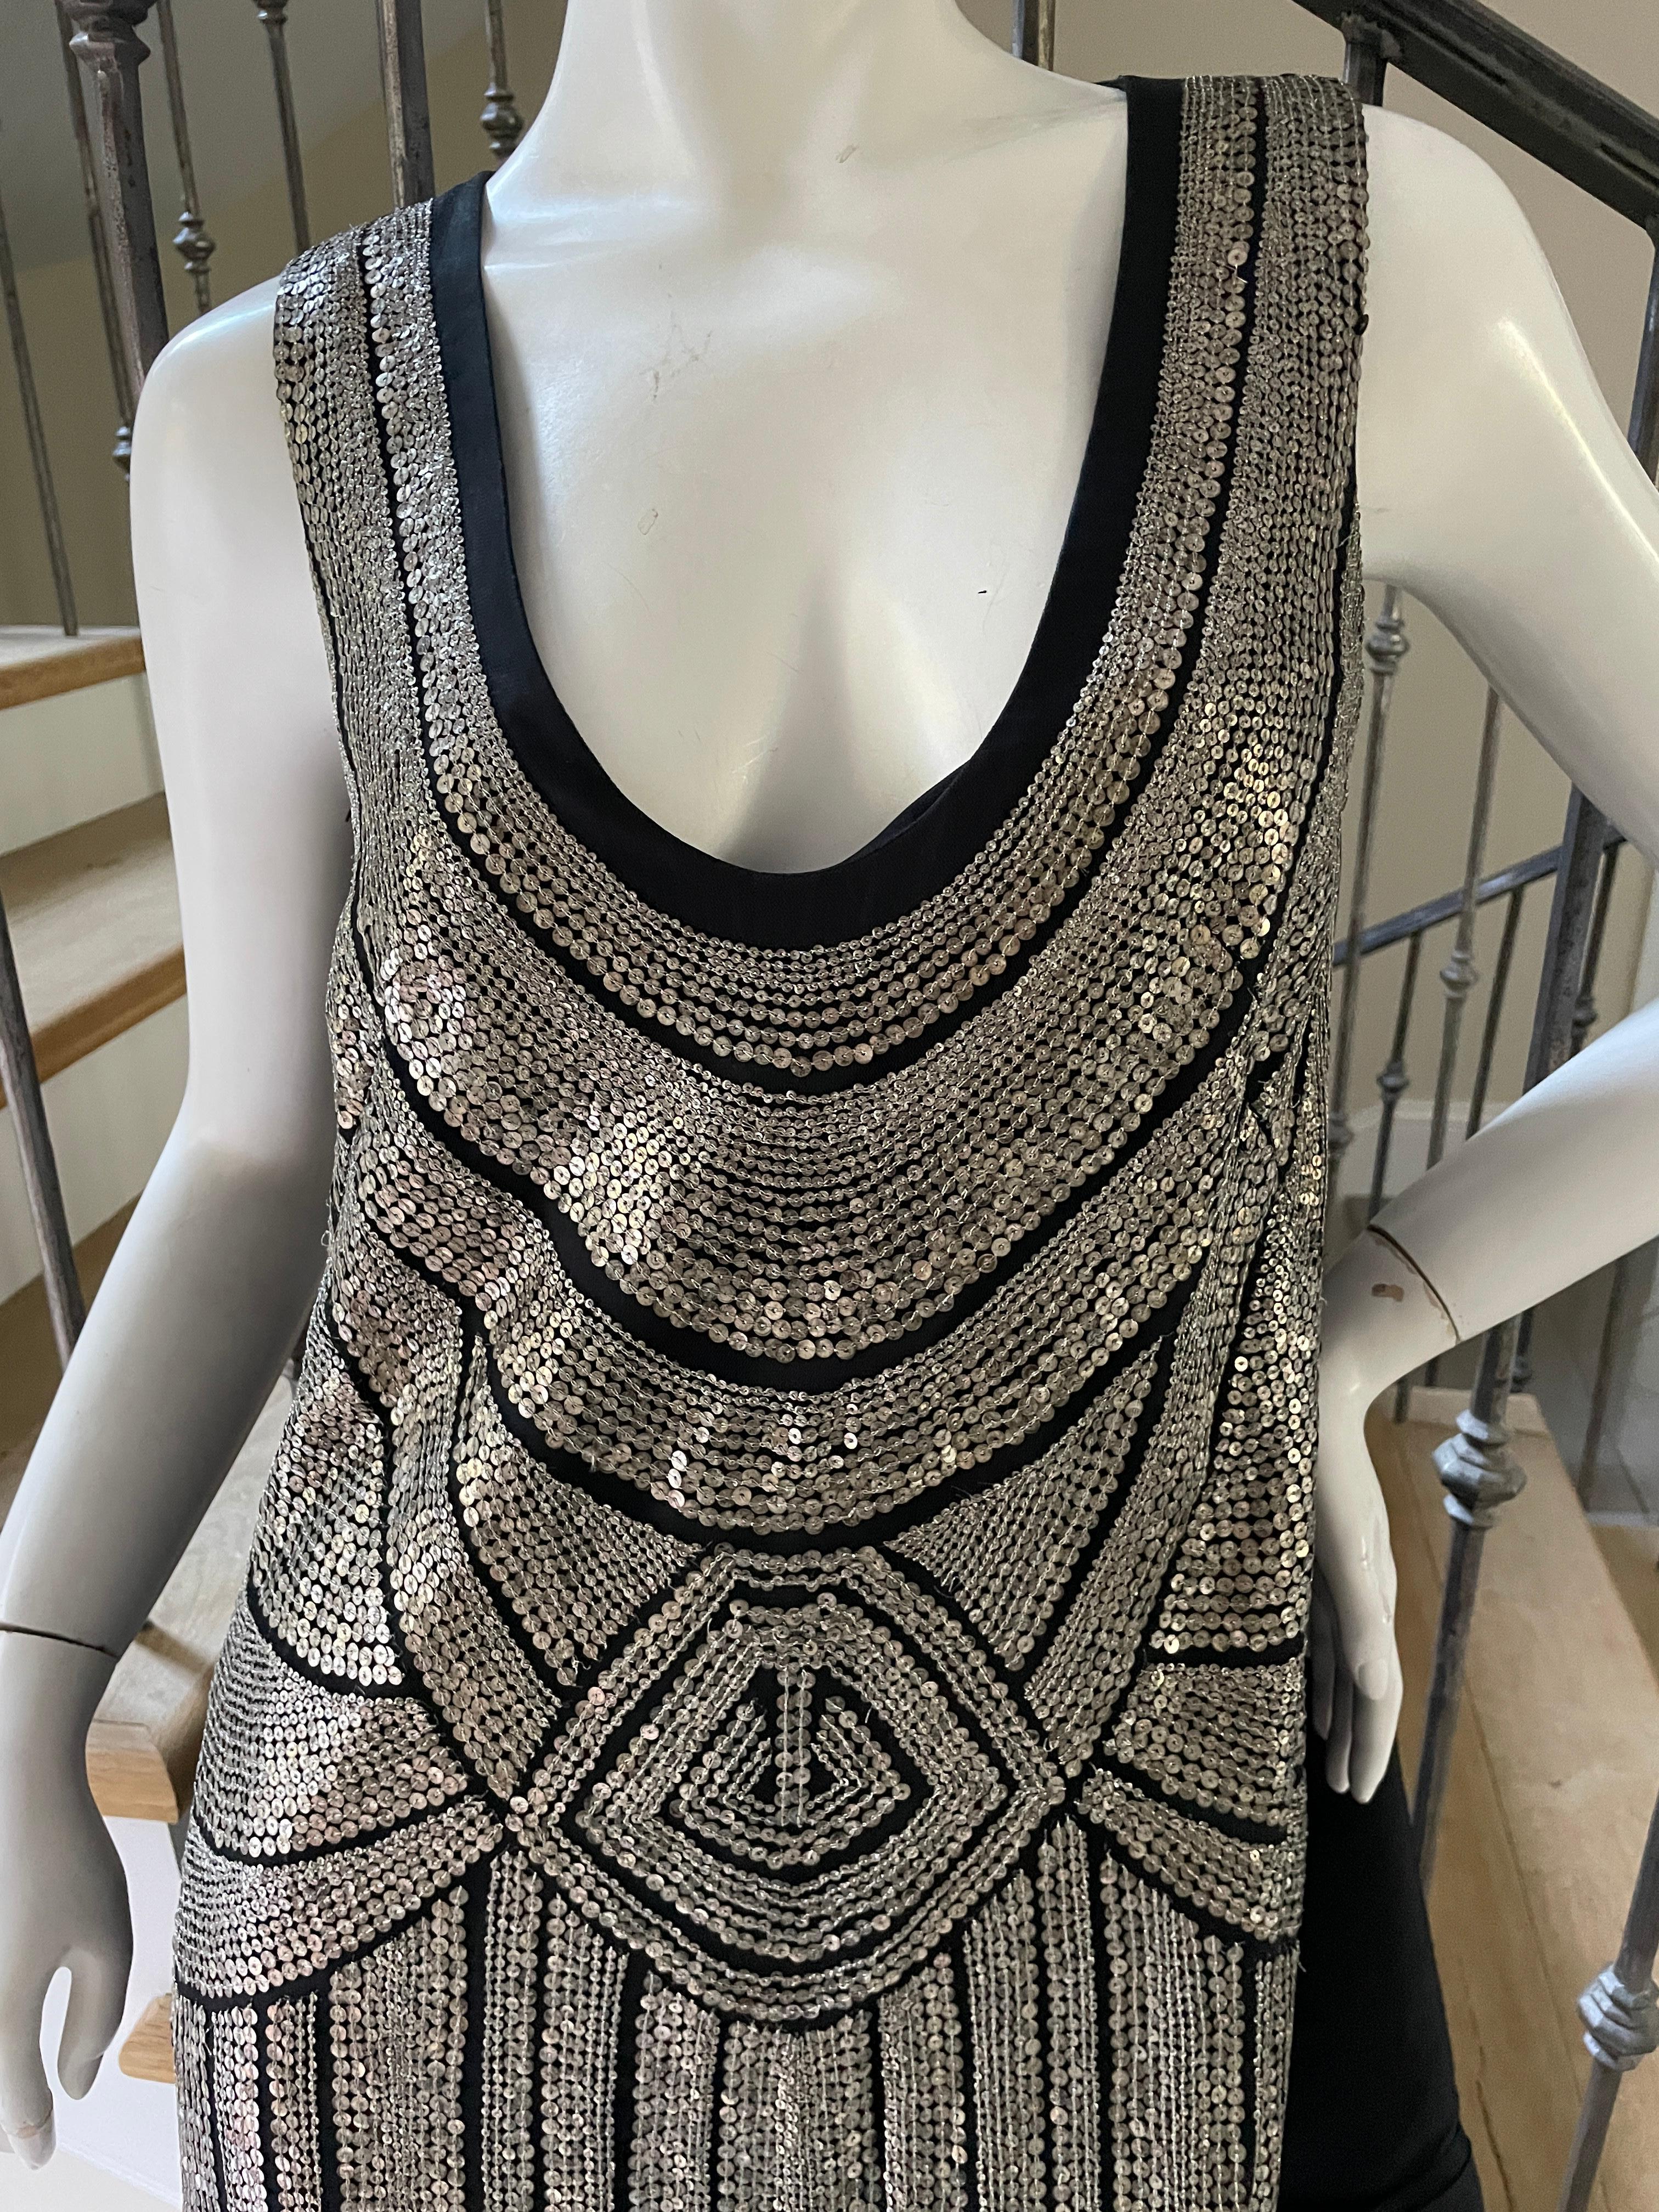 Alberta Ferretti Heavily Embellished Sequin Flapper Style Vintage Dress
 Size 4 US but runs large
 This is so pretty, looks better on live model.
Bust 34